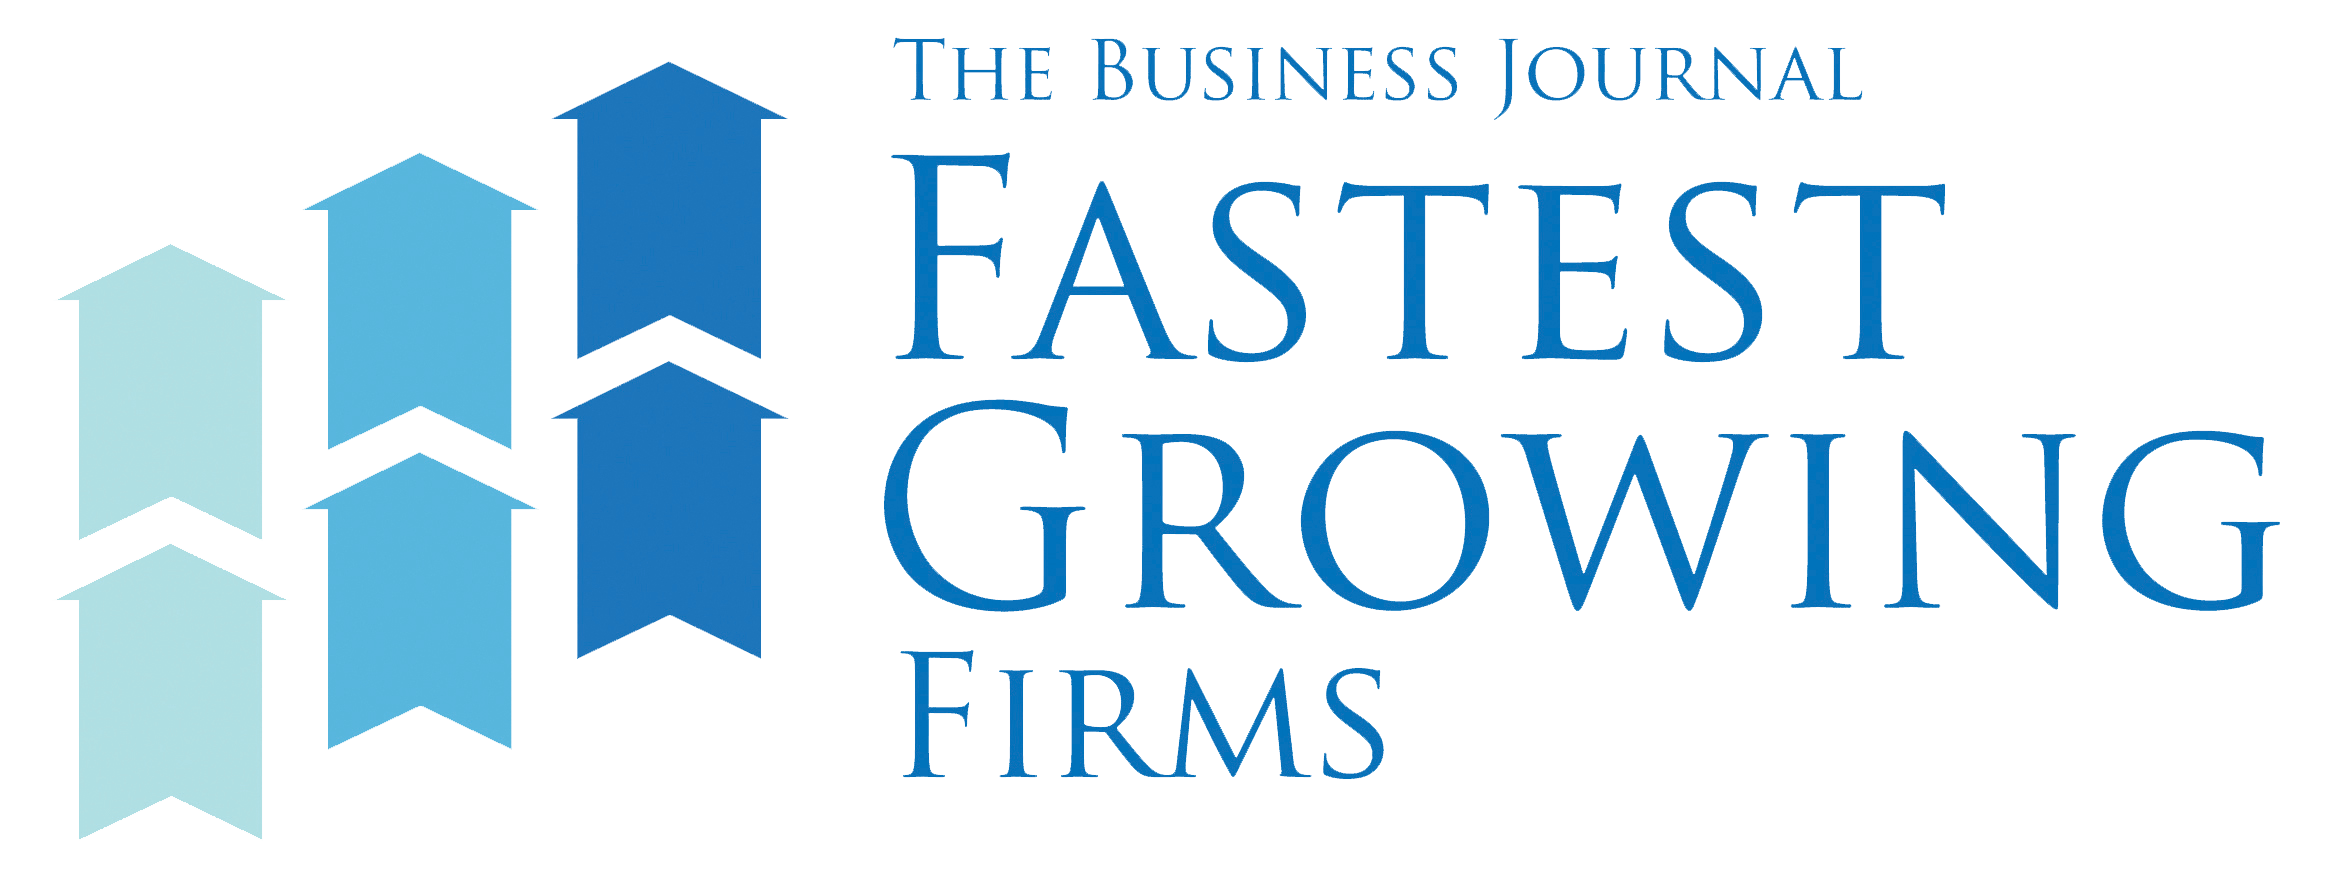 Price Erecting Recognized as one of Milwaukee Business Journal’s Fastest Growing Firms!